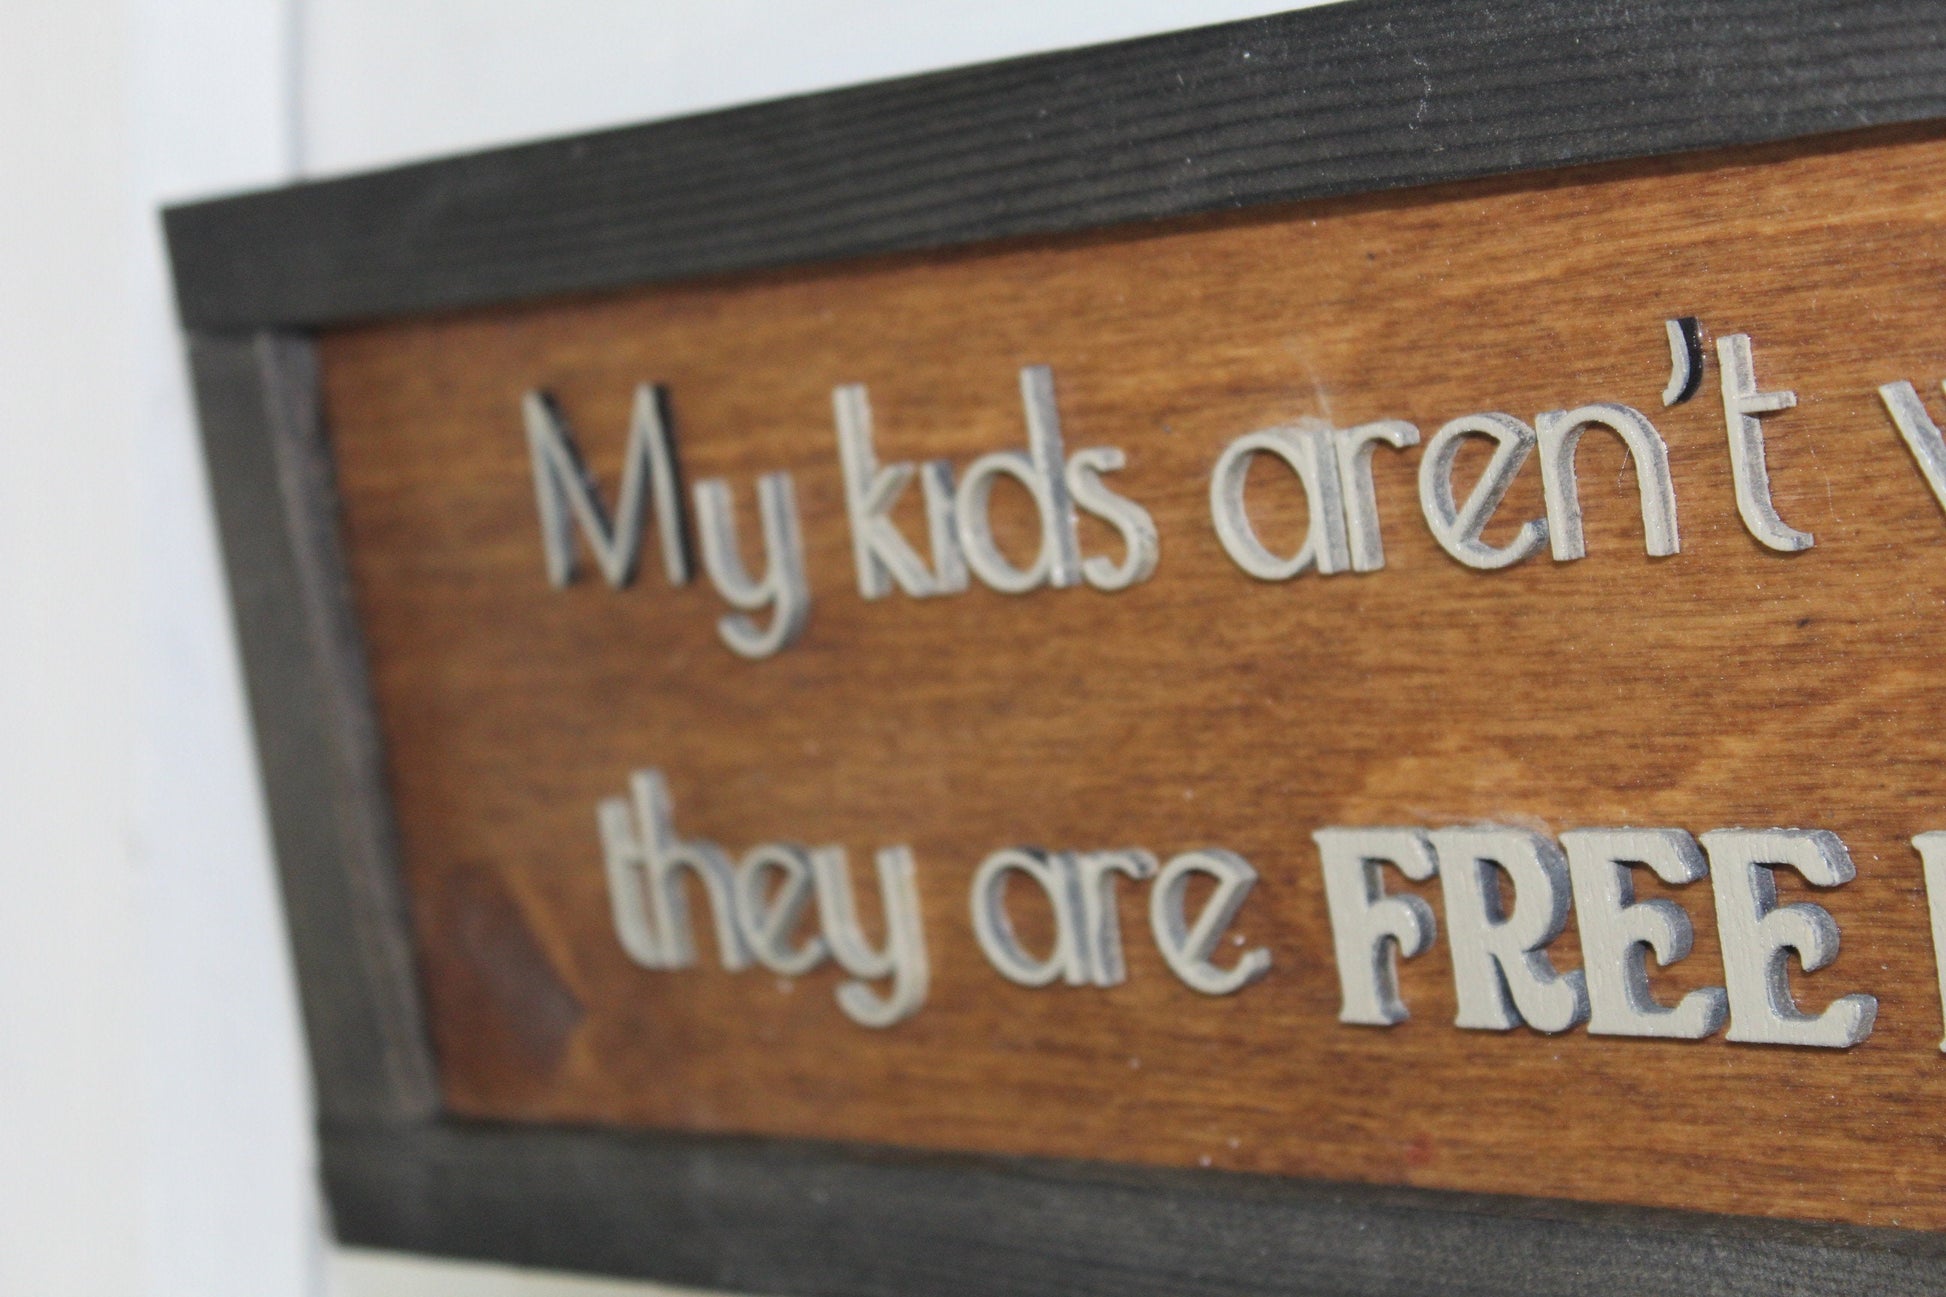 Crazy Kid Wood Sign My Kids Aren't Wild They Are Free Range Raised Text Primitive Sign Rustic Wall Decoration Farm Life Silly Nutty Decor